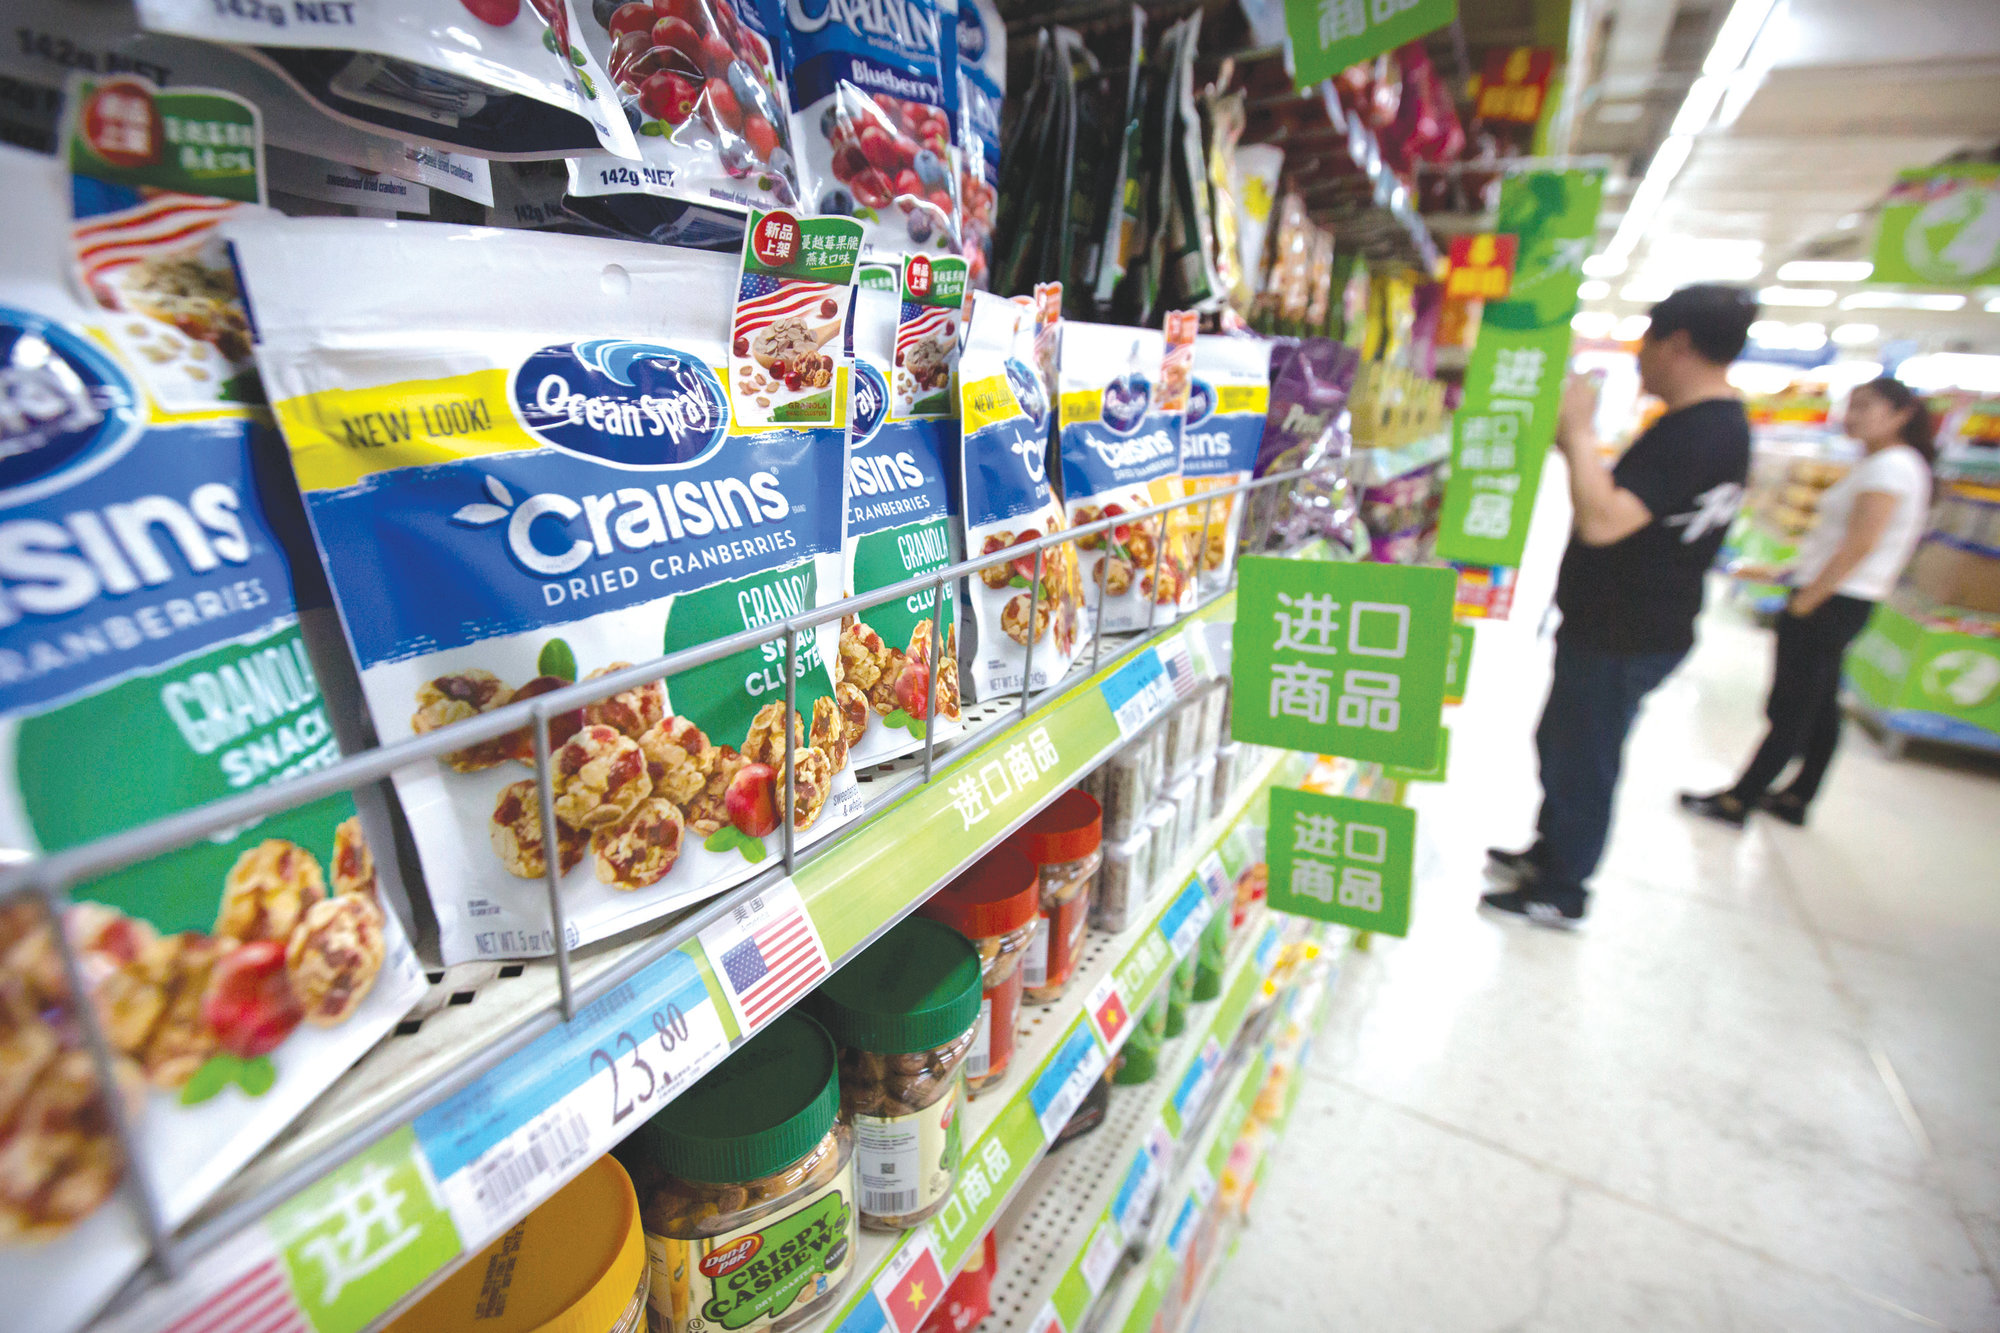 Customers shop near dried cranberry products from the United States at a supermarket in Beijing on Tuesday. Sending Wall Street into a slide, China announced higher tariffs Monday on $60 billion worth of American goods in retaliation for President Donald Trump's latest penalties on Chinese products.